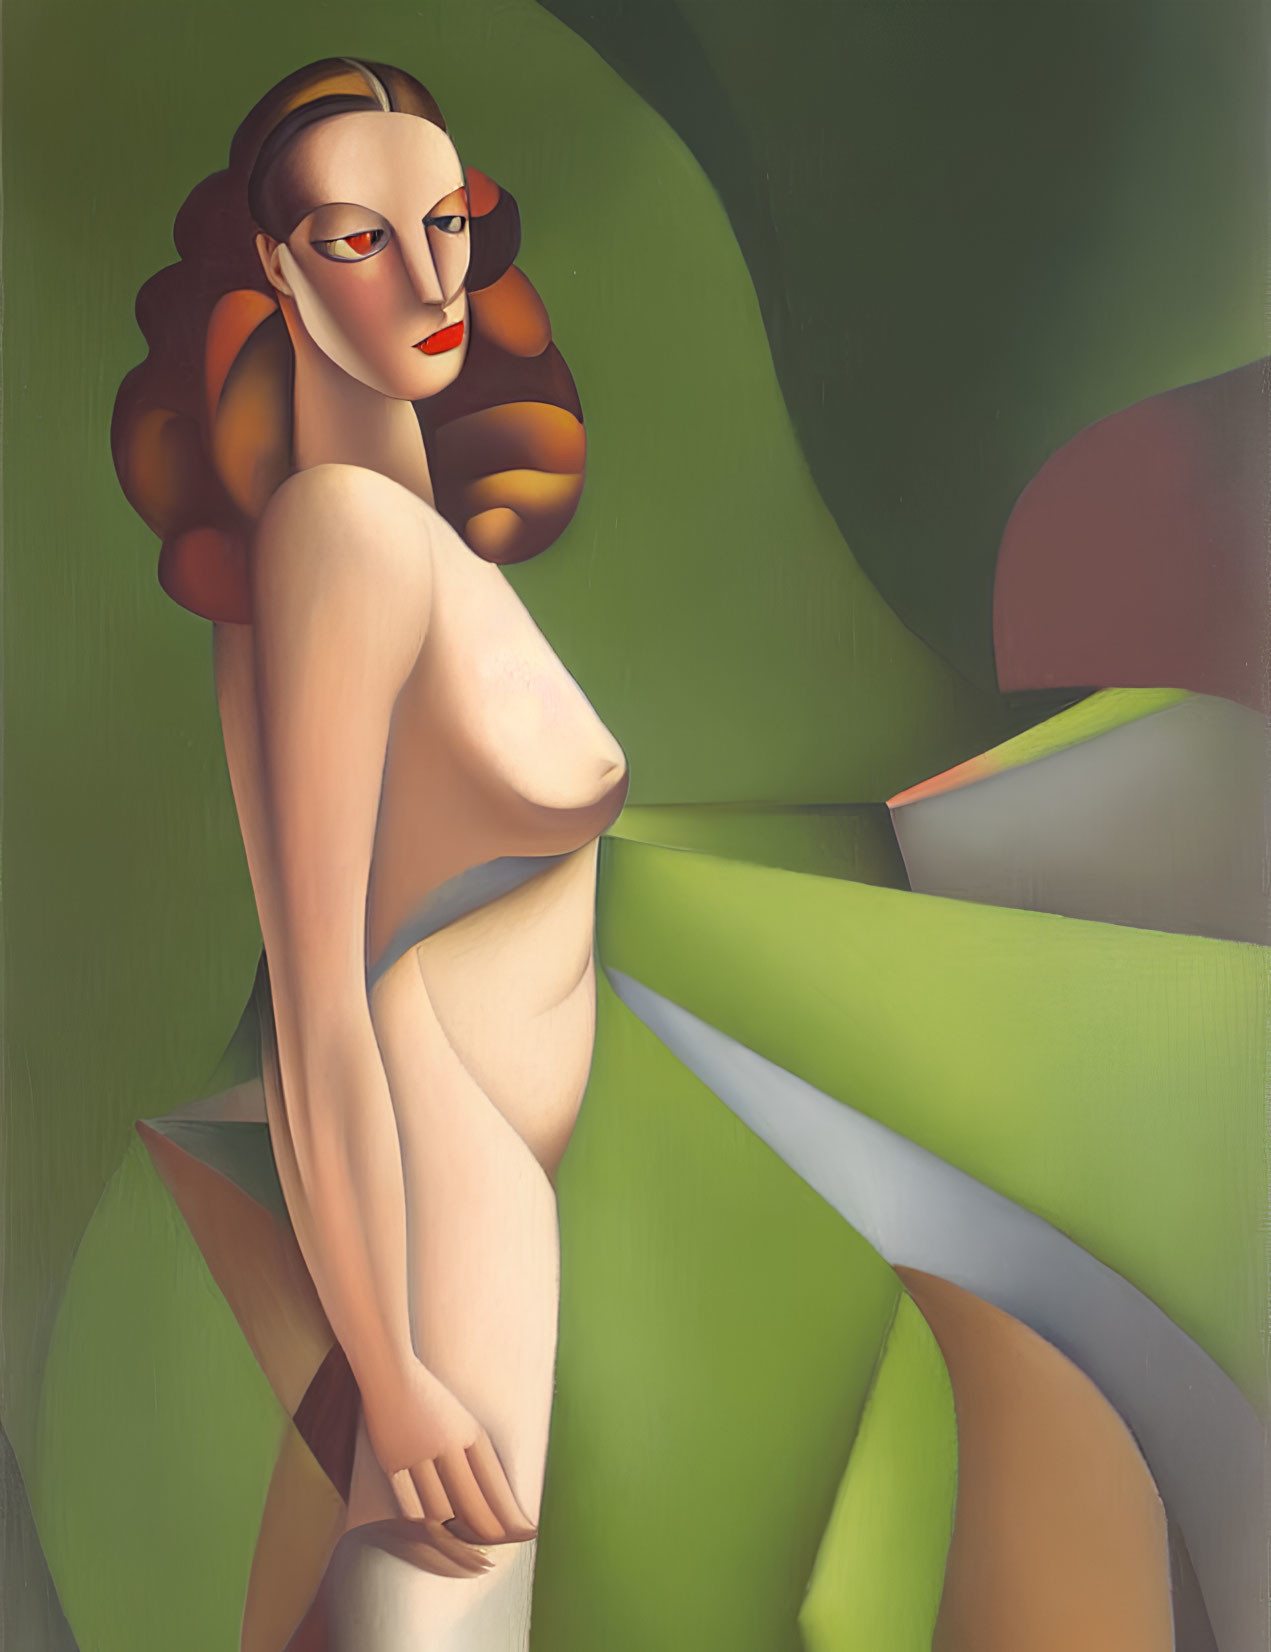 Abstract painting of seated nude female figure with geometric shapes in green hues